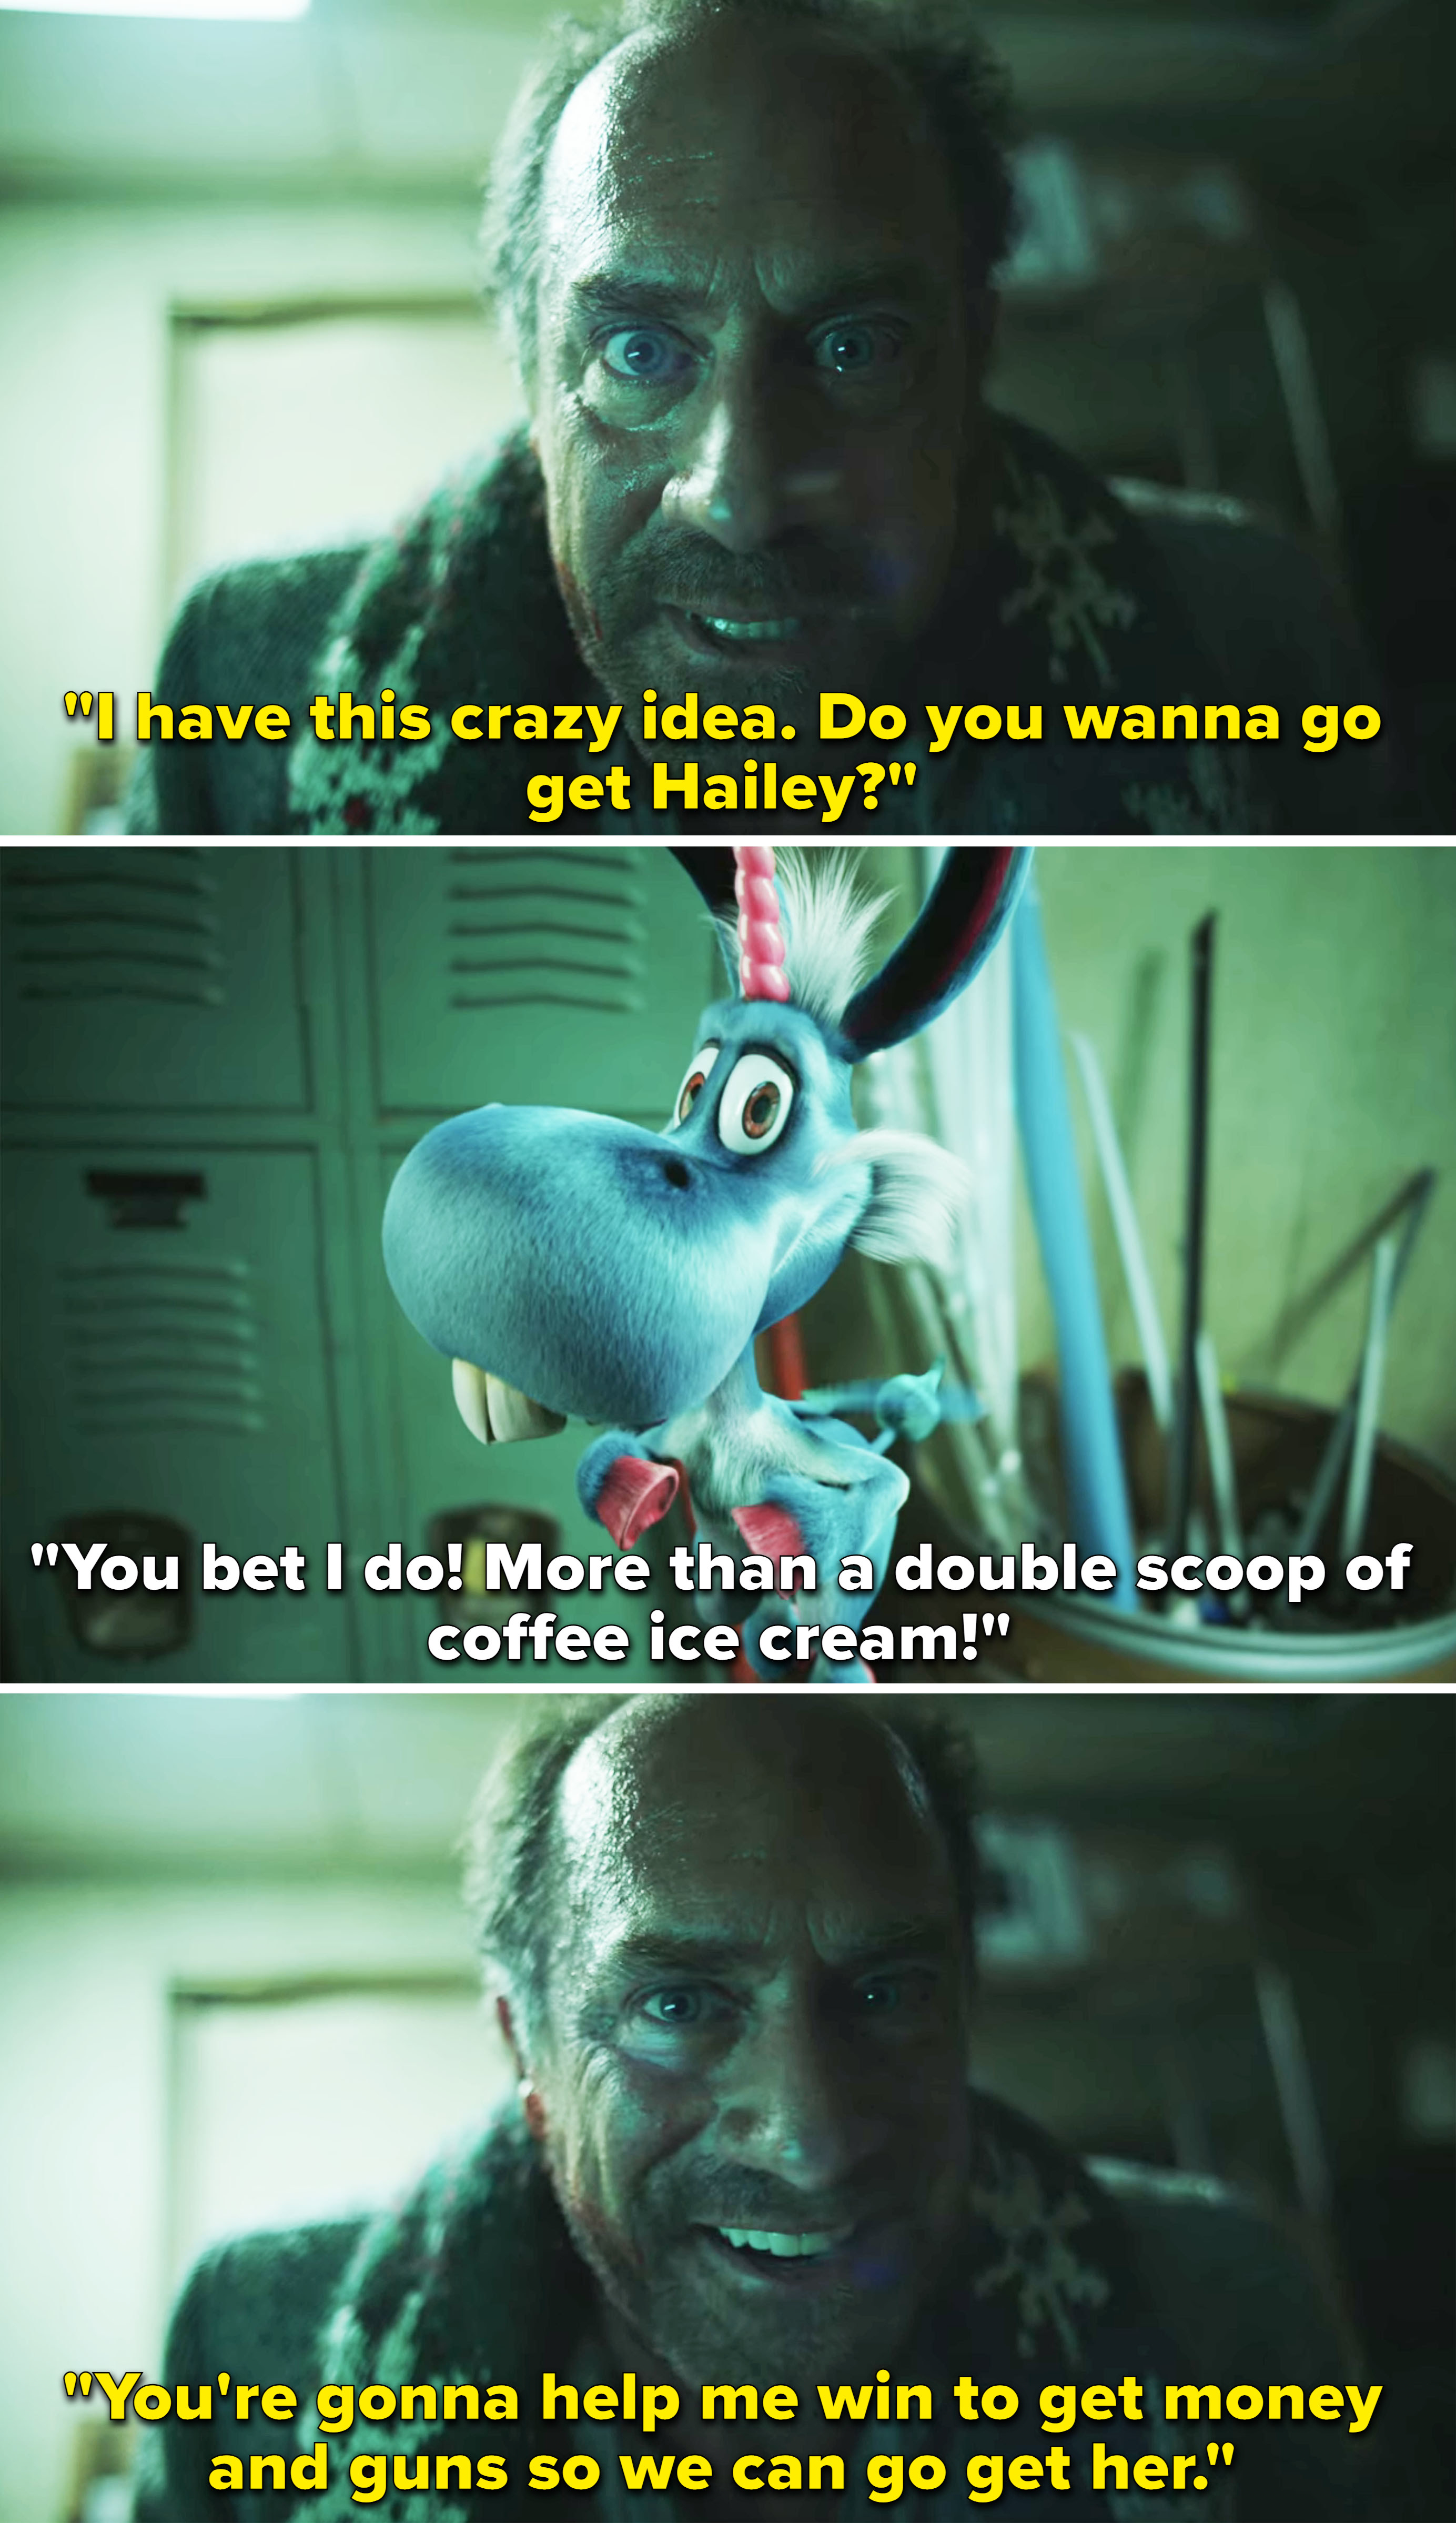 christopher&#x27;s character saying, i have this crazy idea, do you wanna go get hailey